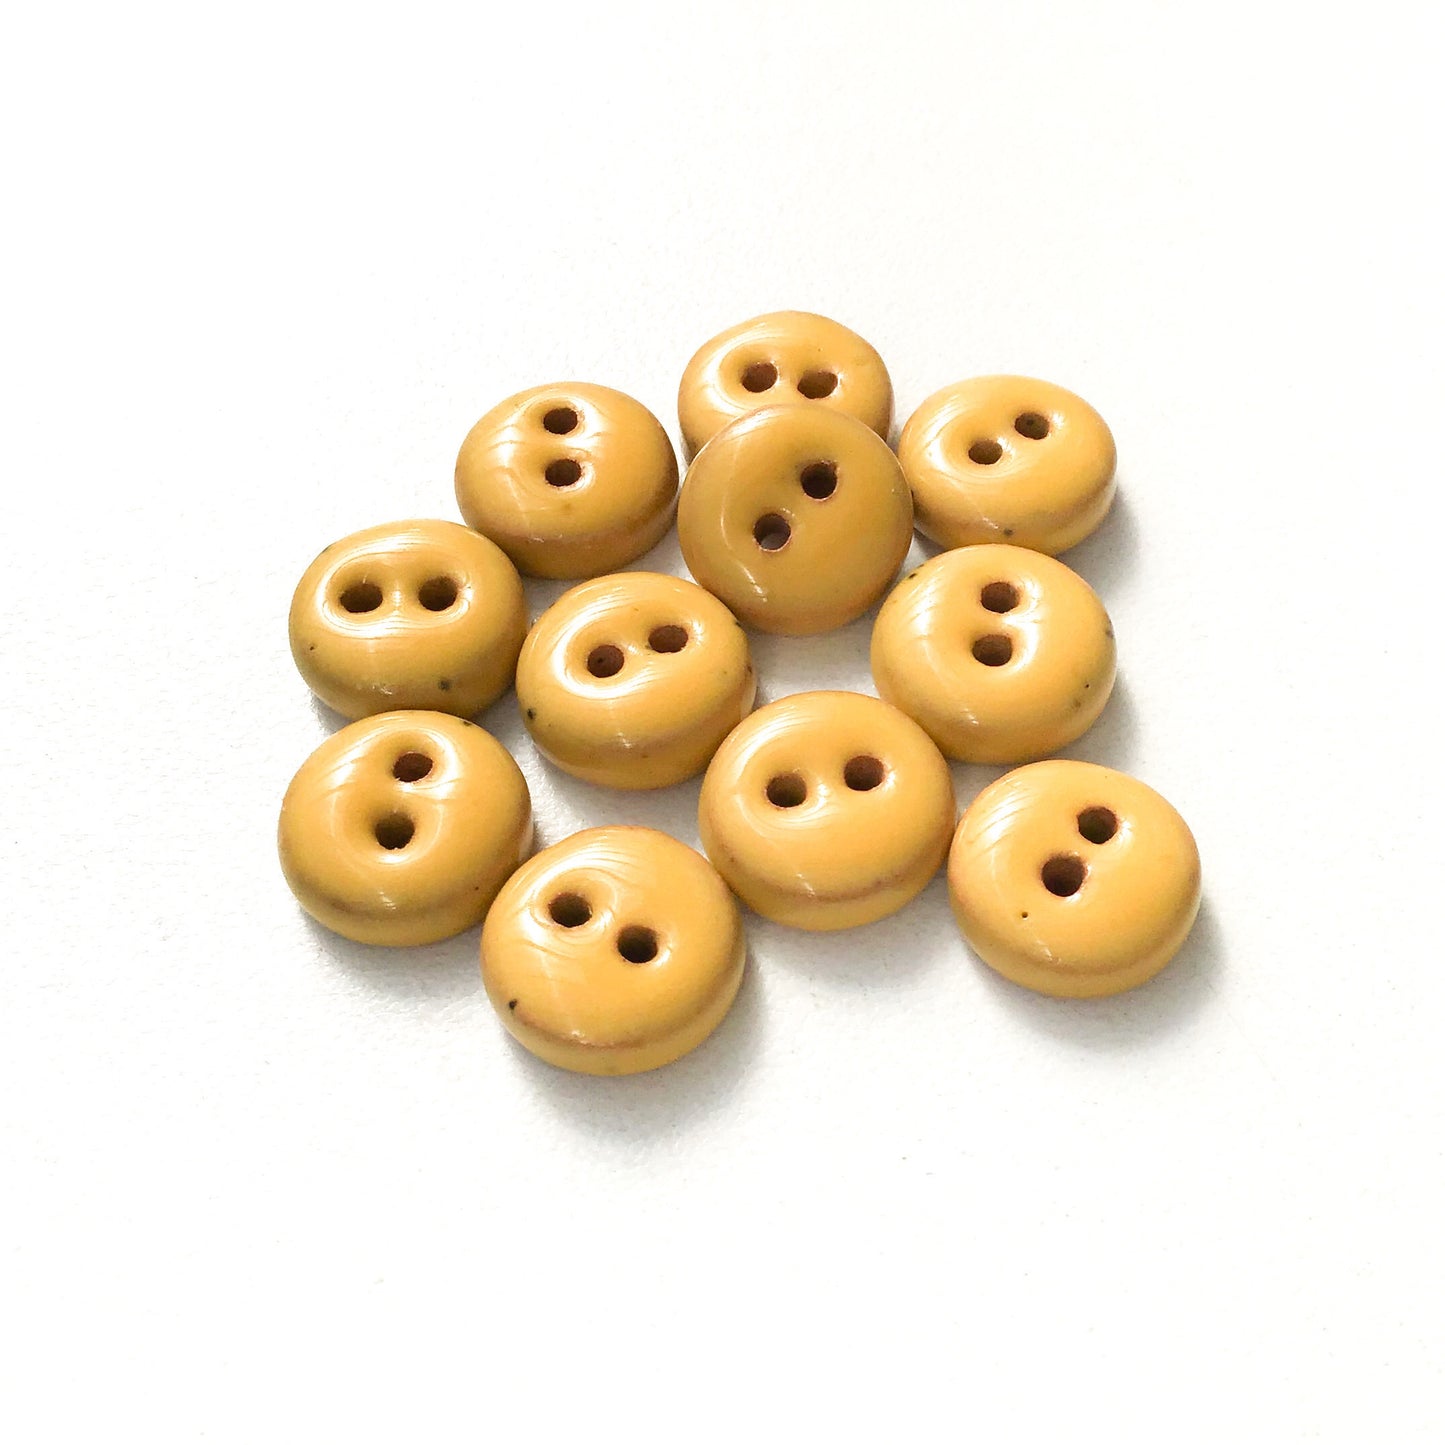 Yellow Ceramic Buttons - Hand Made Clay Buttons - 7/16" - 11 Pack (ws-273)